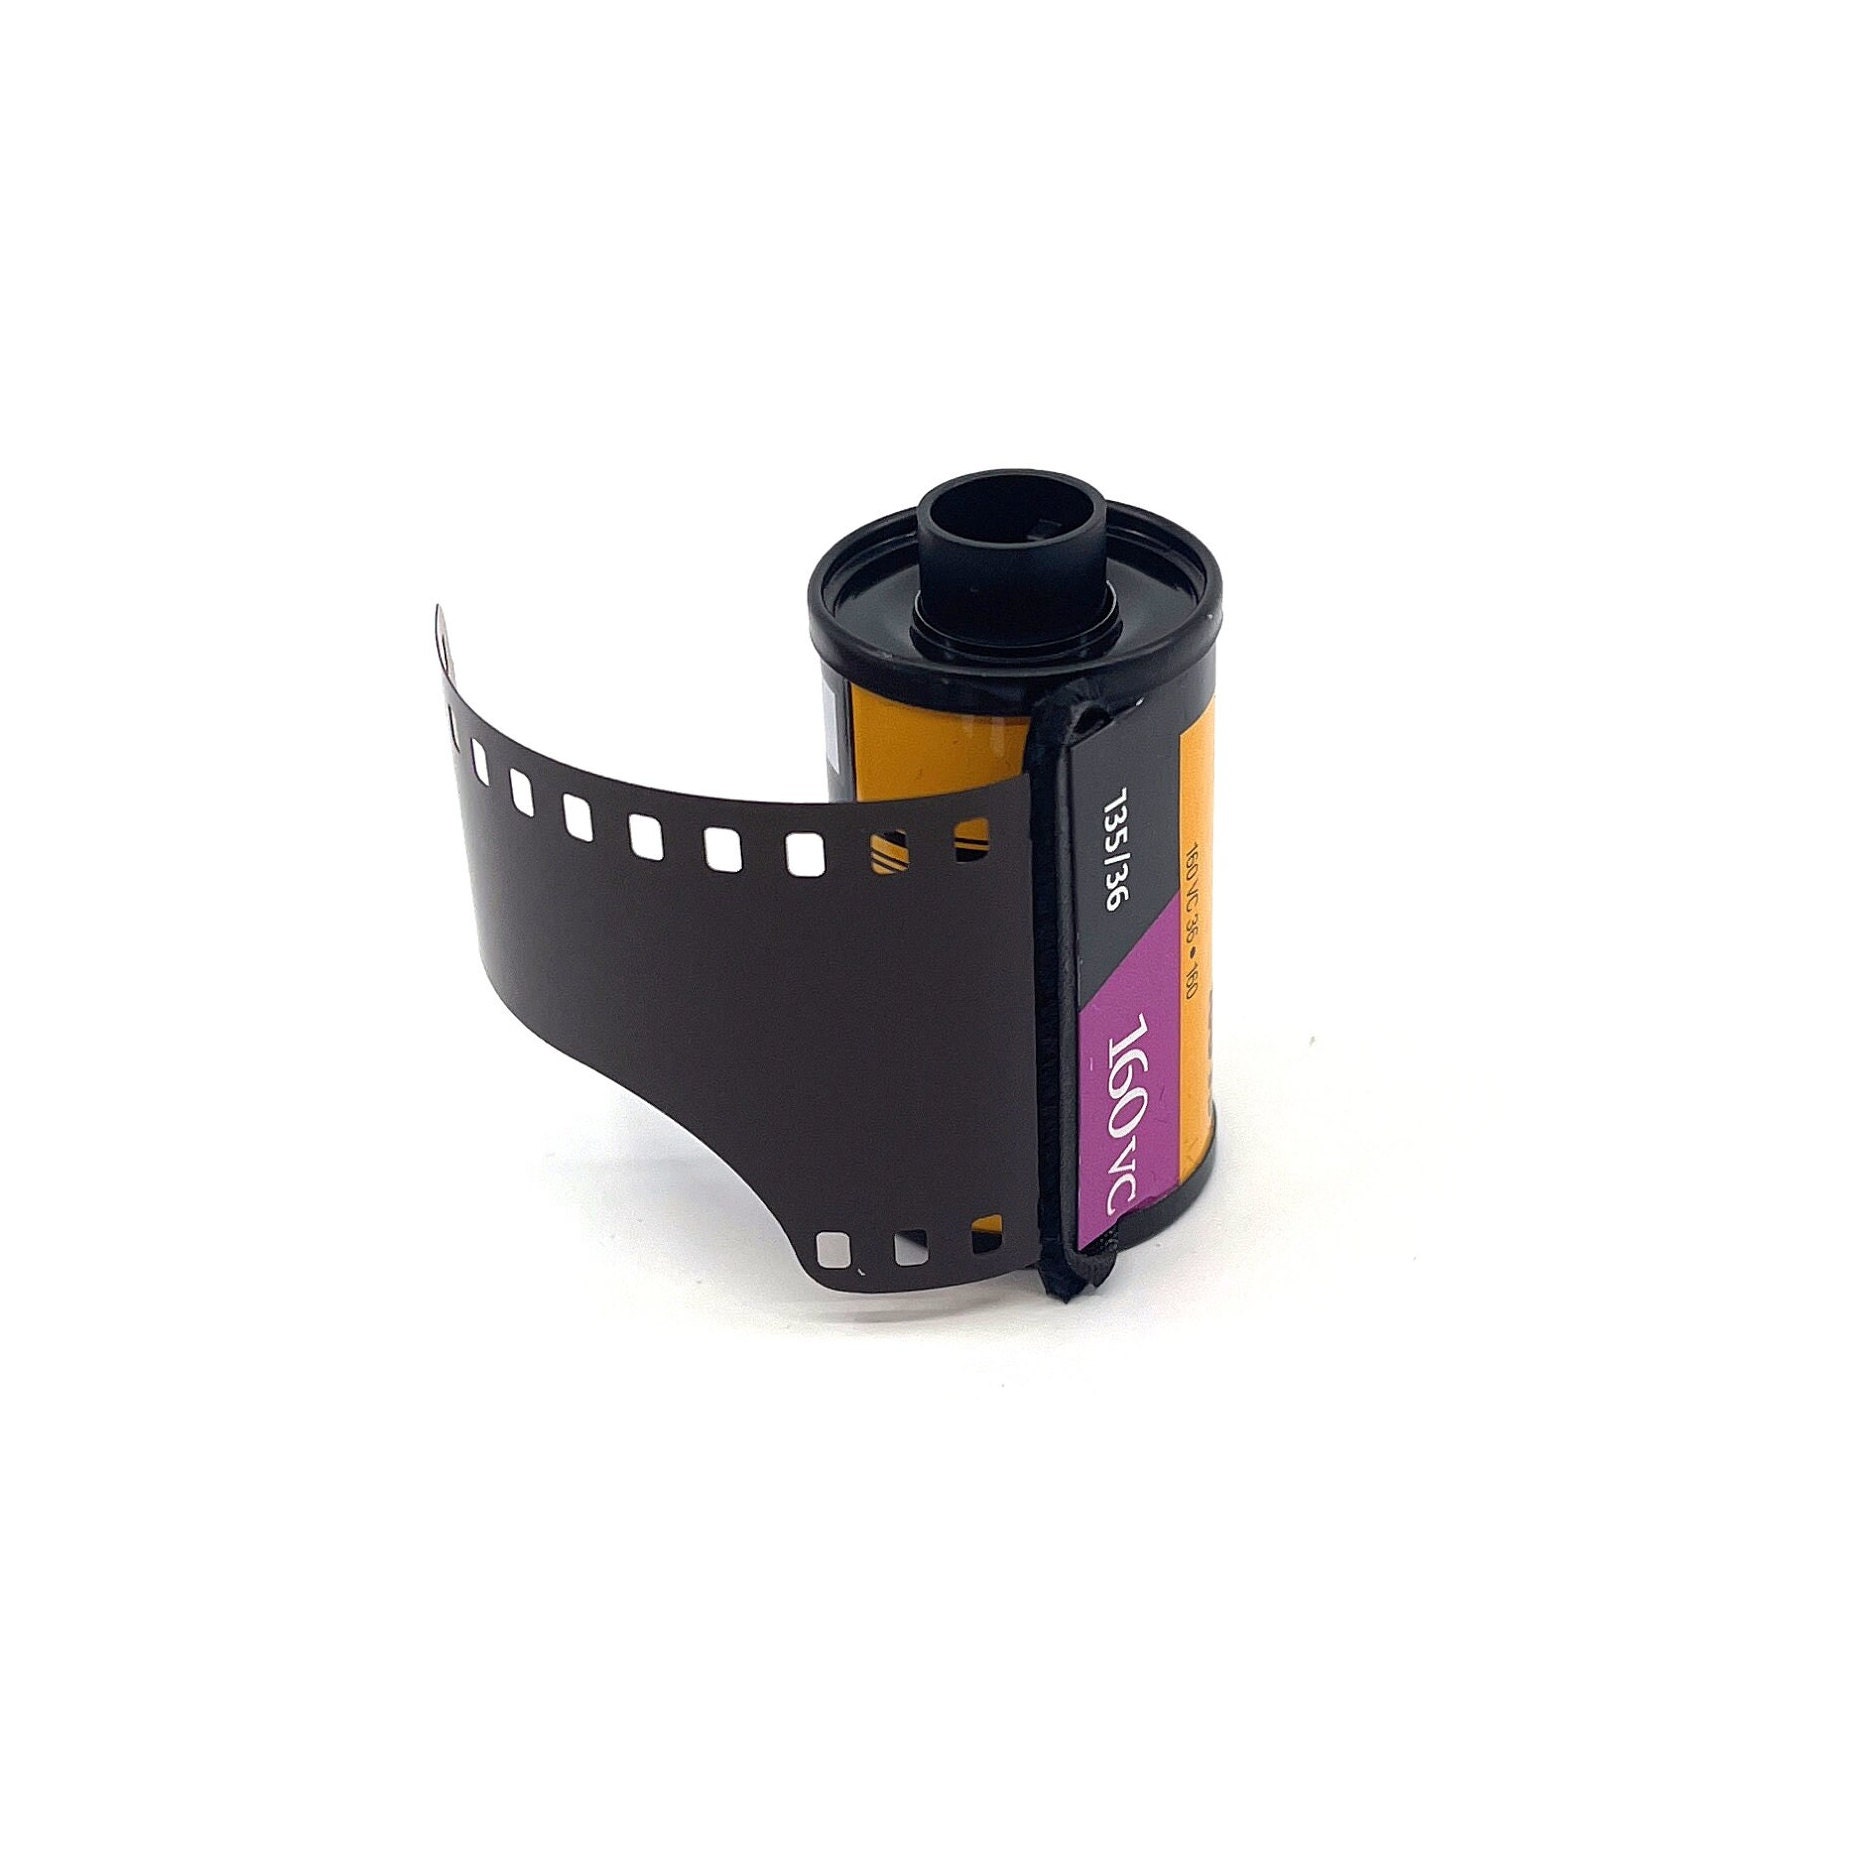 Buy 35mm Film Roll Online In India -  India